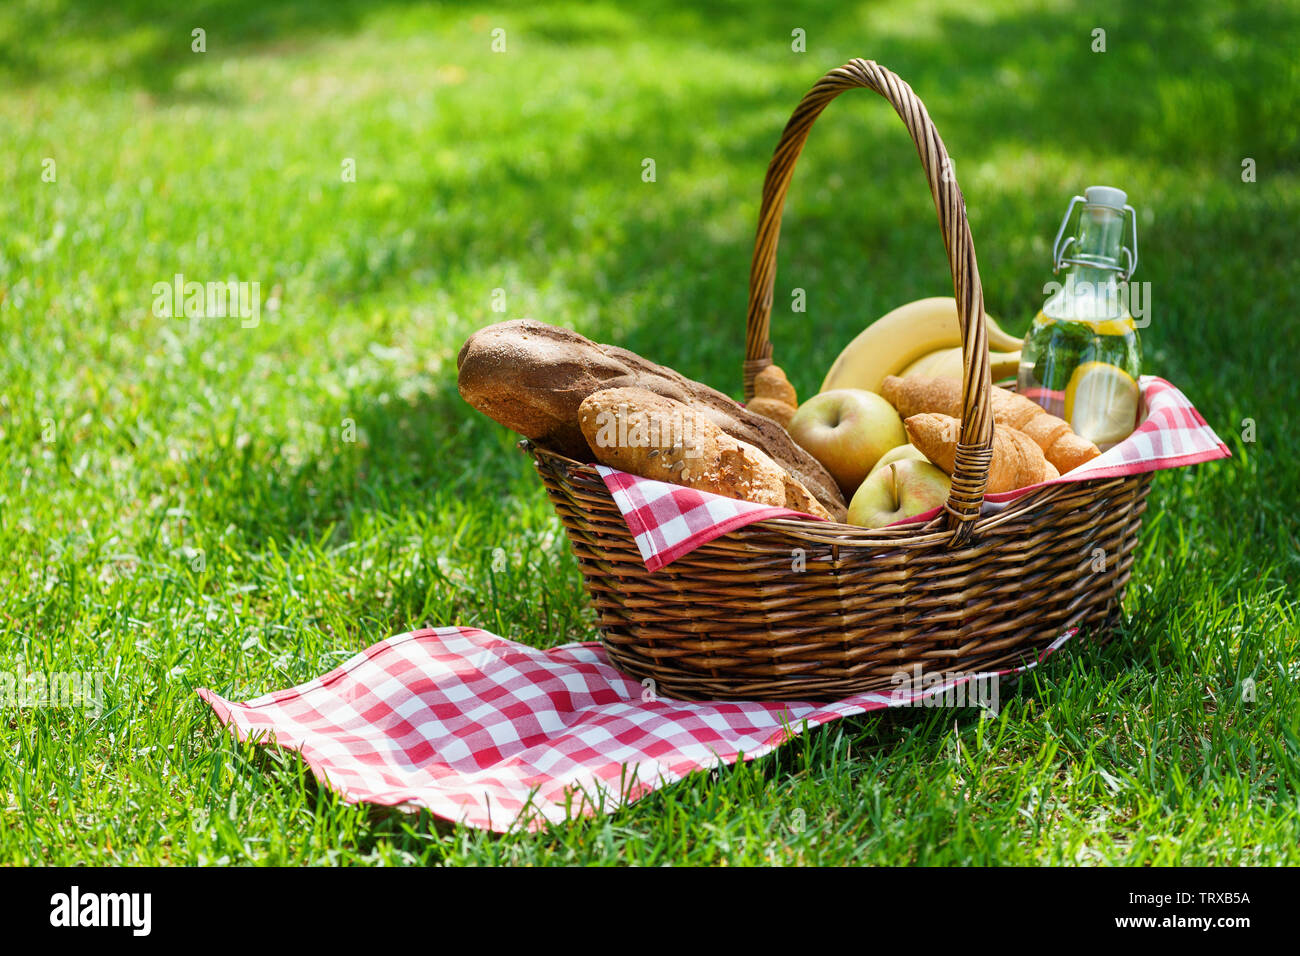 Wicker picnic basket with food and drink in a park. Summer picnic on the grass or lawn. Stock Photo